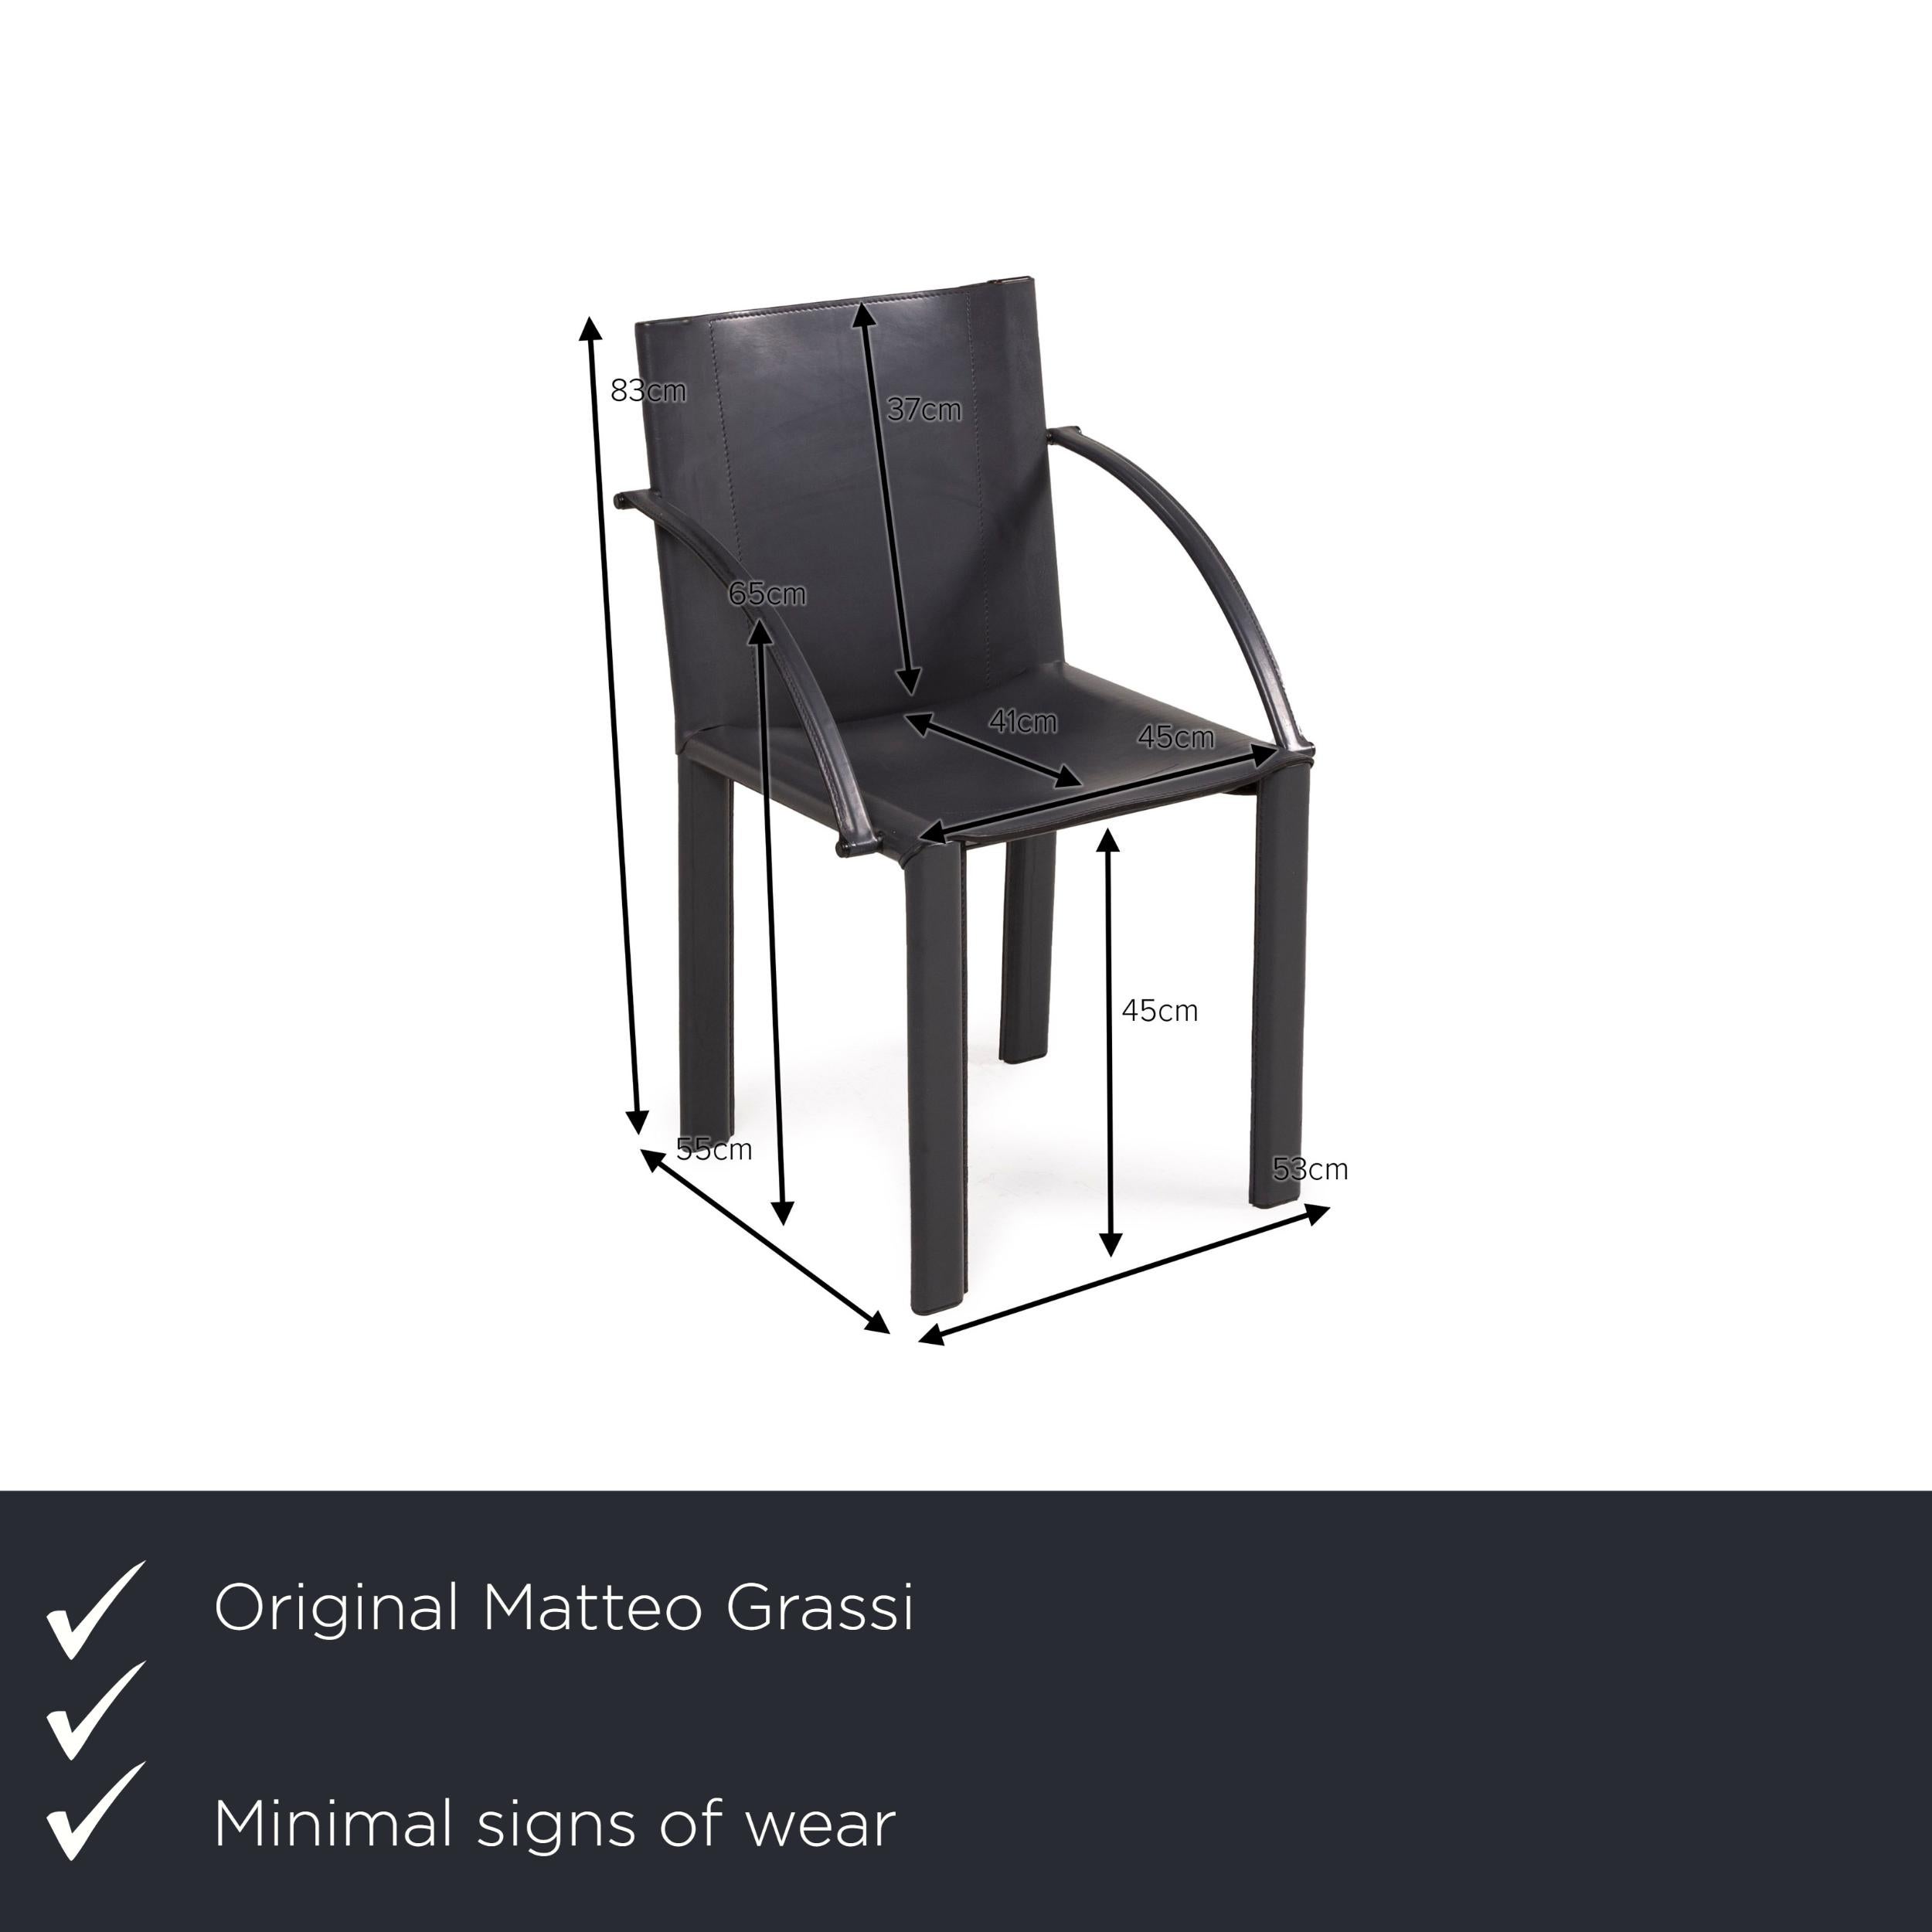 We present to you a Matteo Grassi leather chair black vintage armchair.


 Product measurements in centimeters:
 

Depth: 55
Width: 53
Height: 83
Seat height: 45
Rest height: 64
Seat depth: 41
Seat width: 45
Back height: 37.
 